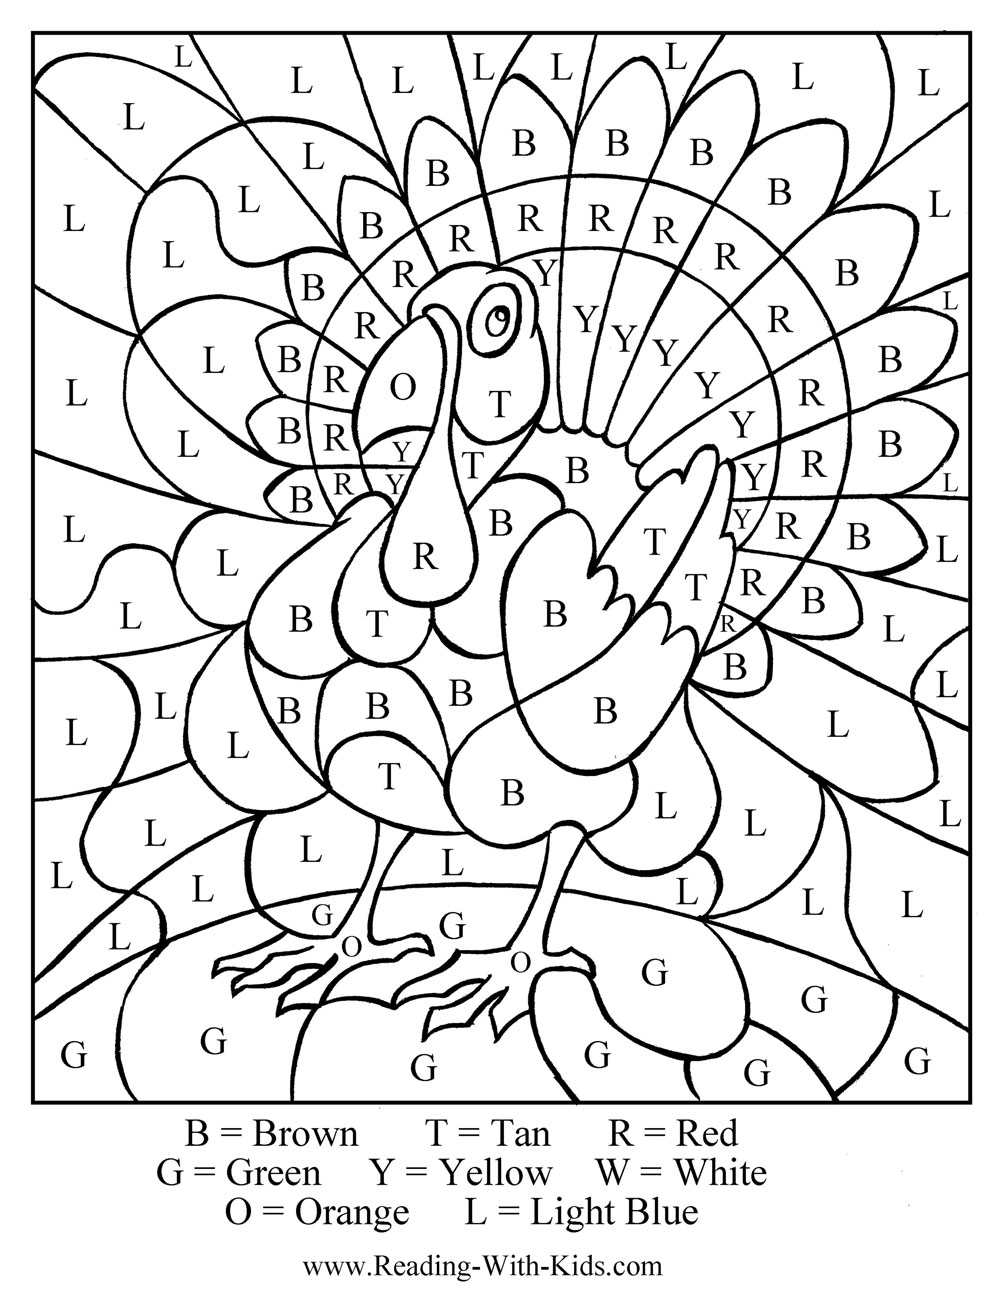 ThanksGiving coloring #6, Download drawings